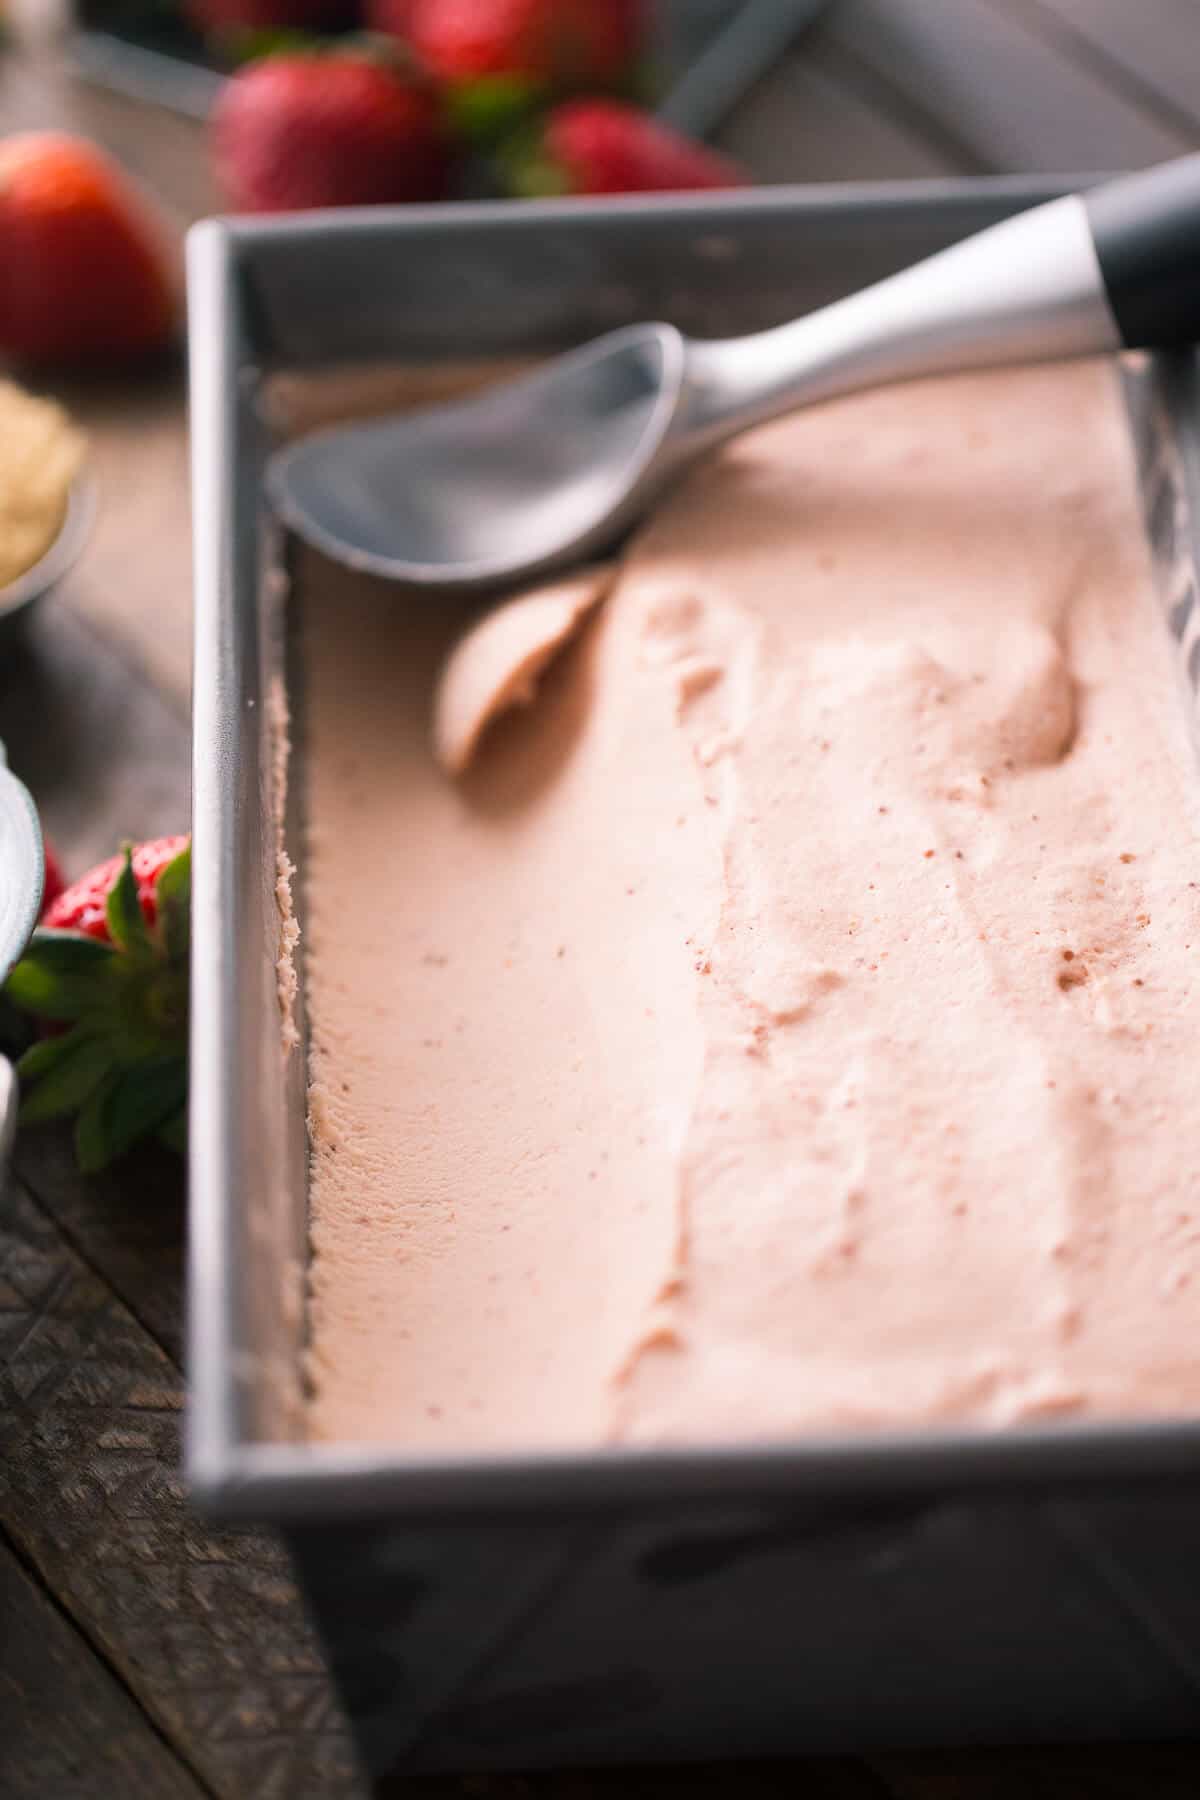 Scooped Basic Brown Sugar Strawberry Ice Cream recipe next to fresh strawberries on a wooden table.